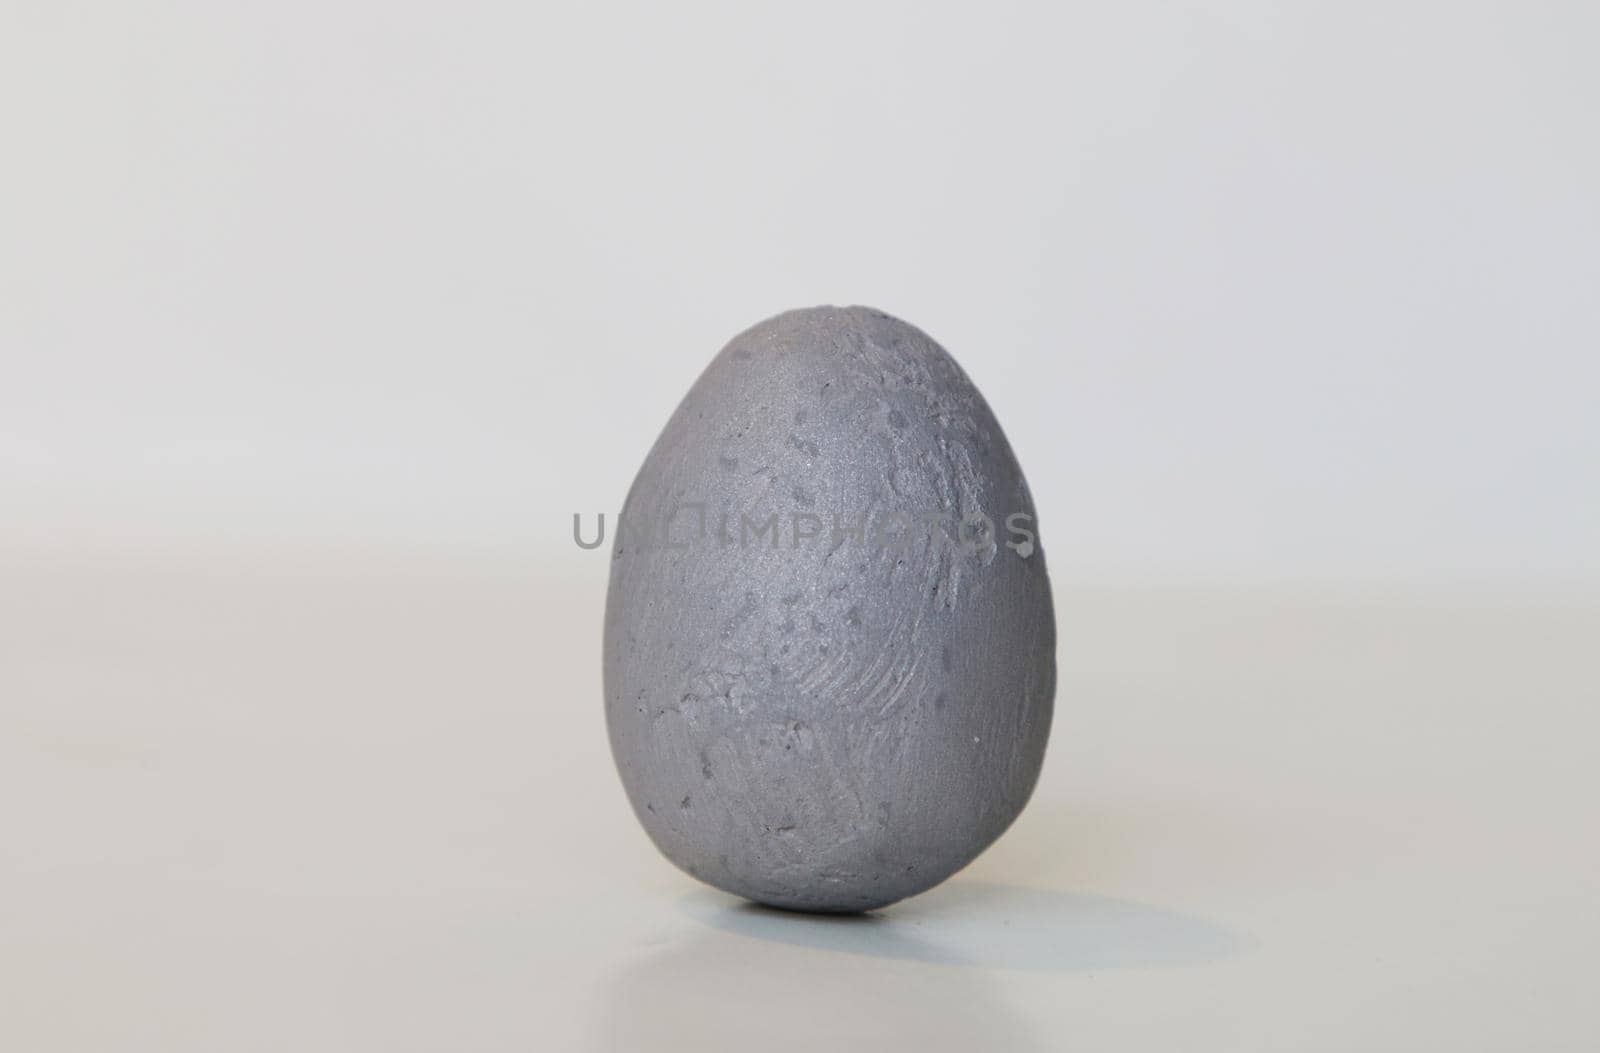 Artificial gray egg on light background. Abstract image of a stone egg.